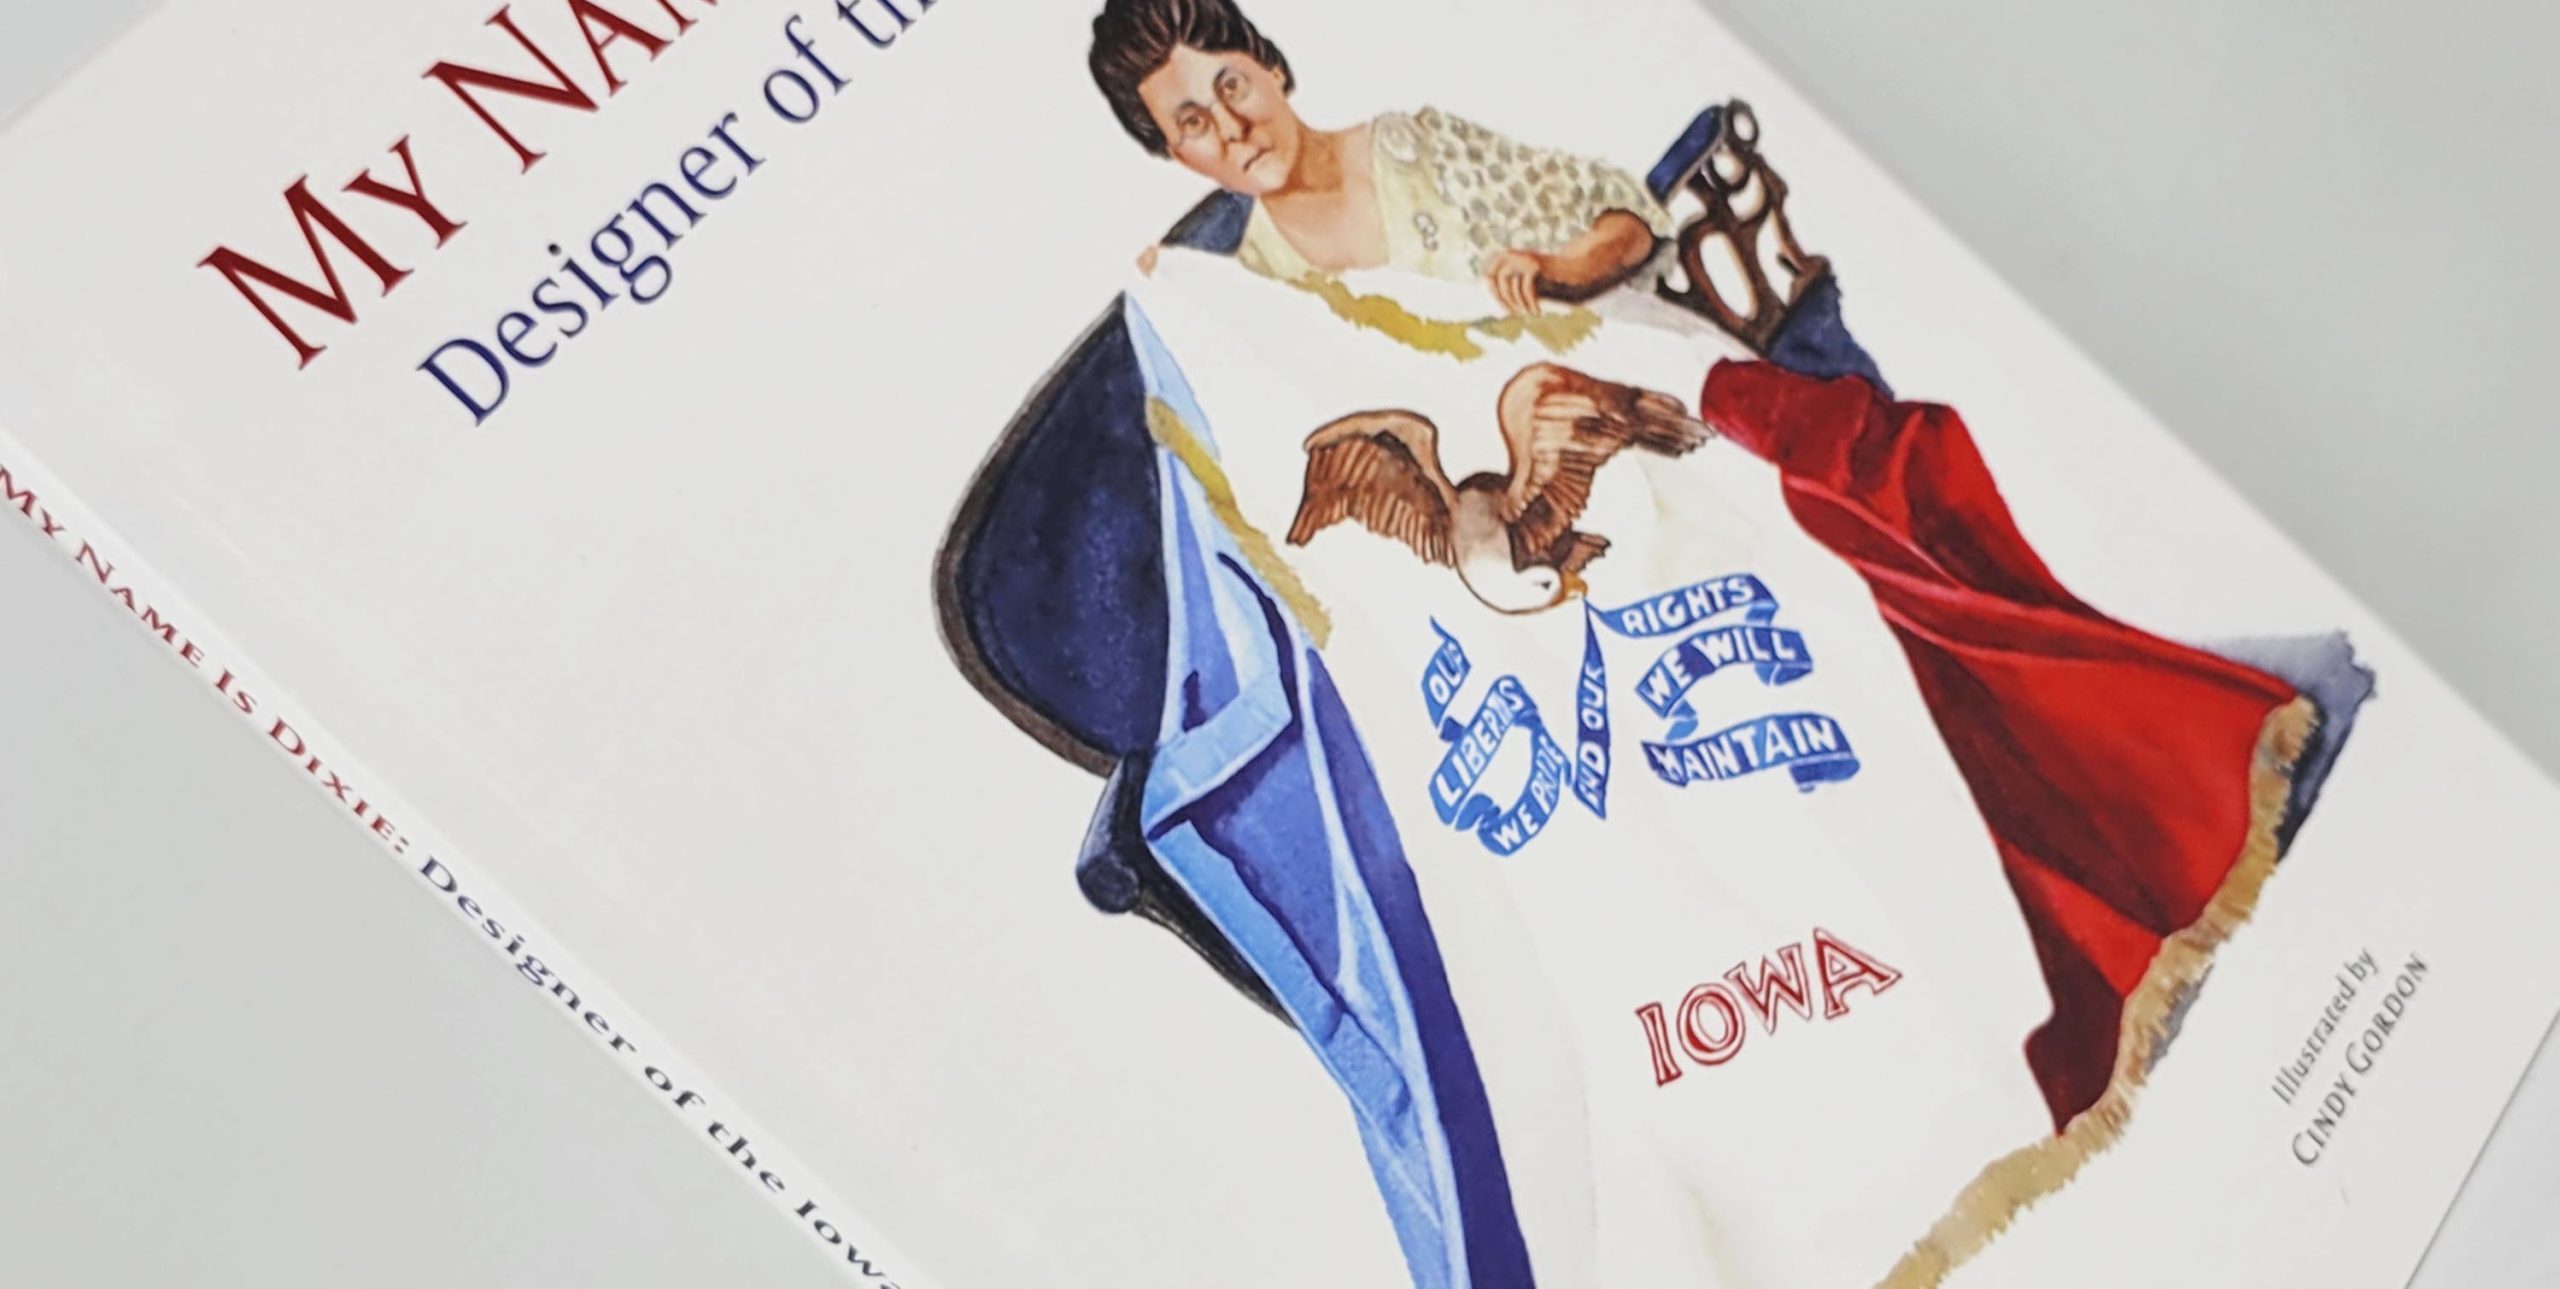 My Name Is Dixie: Designer of the Iowa Flag book cover